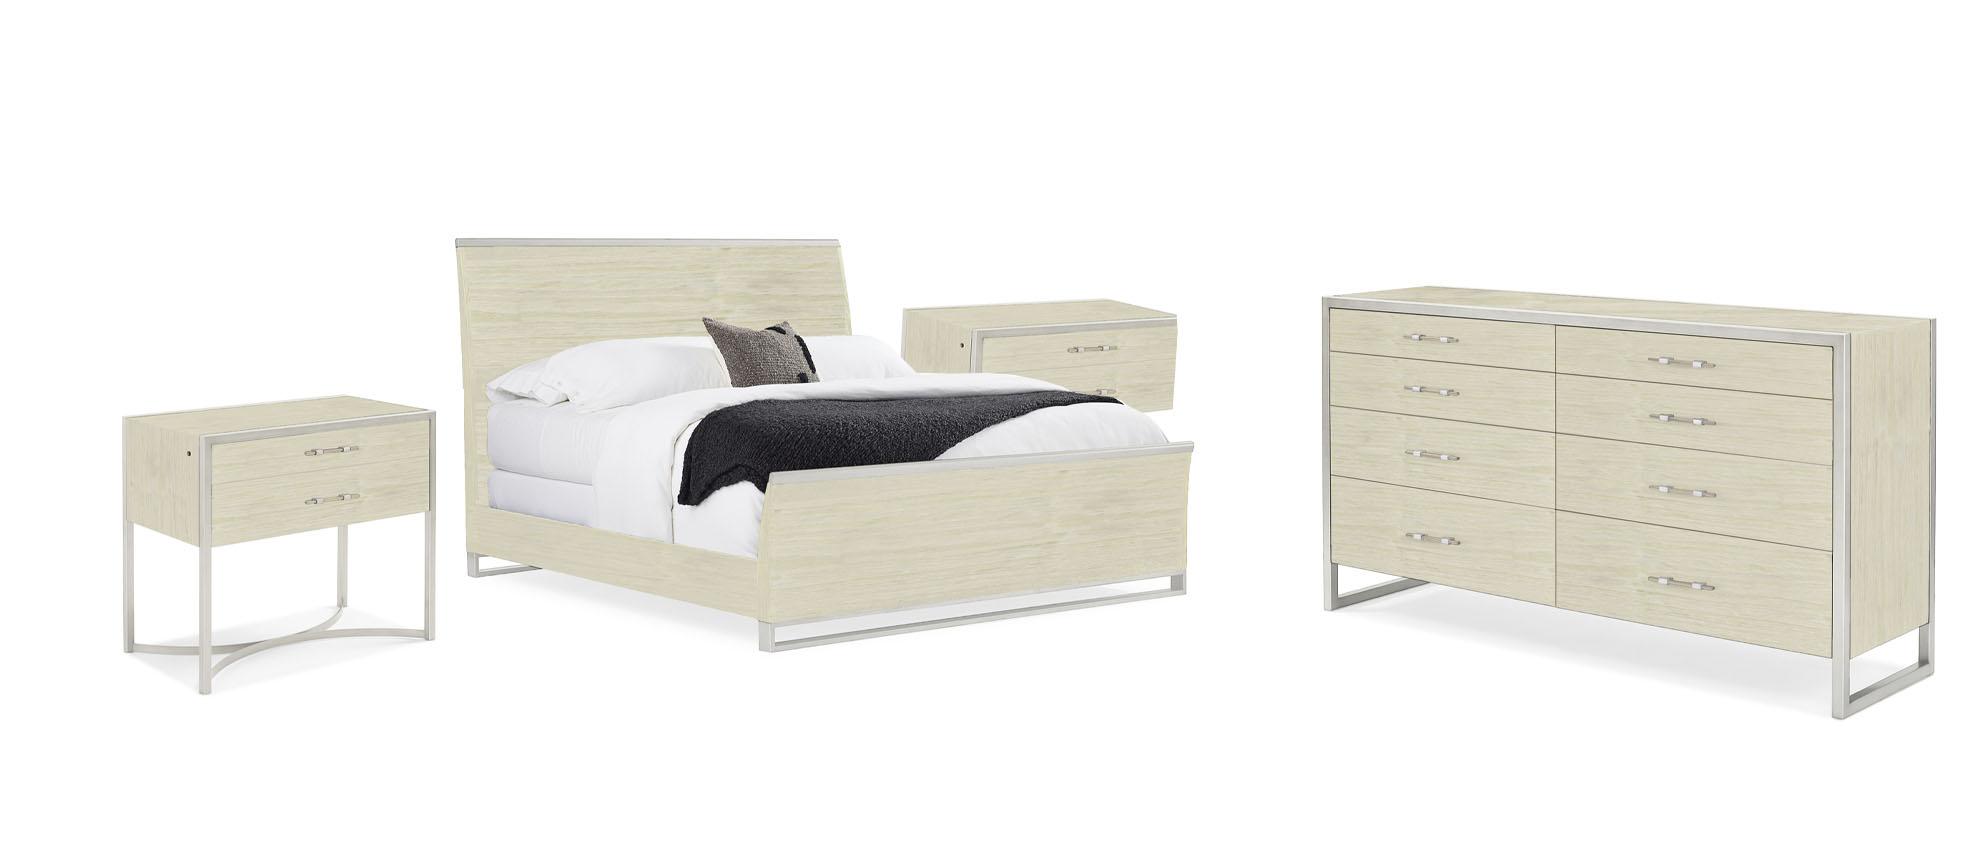 

    
Sea Pearl Finish & Metallic Silver Frame King Size Bed Set 4Pcs REMIX WOOD BED / REMIX LARGE NIGHTSTAND by Caracole
